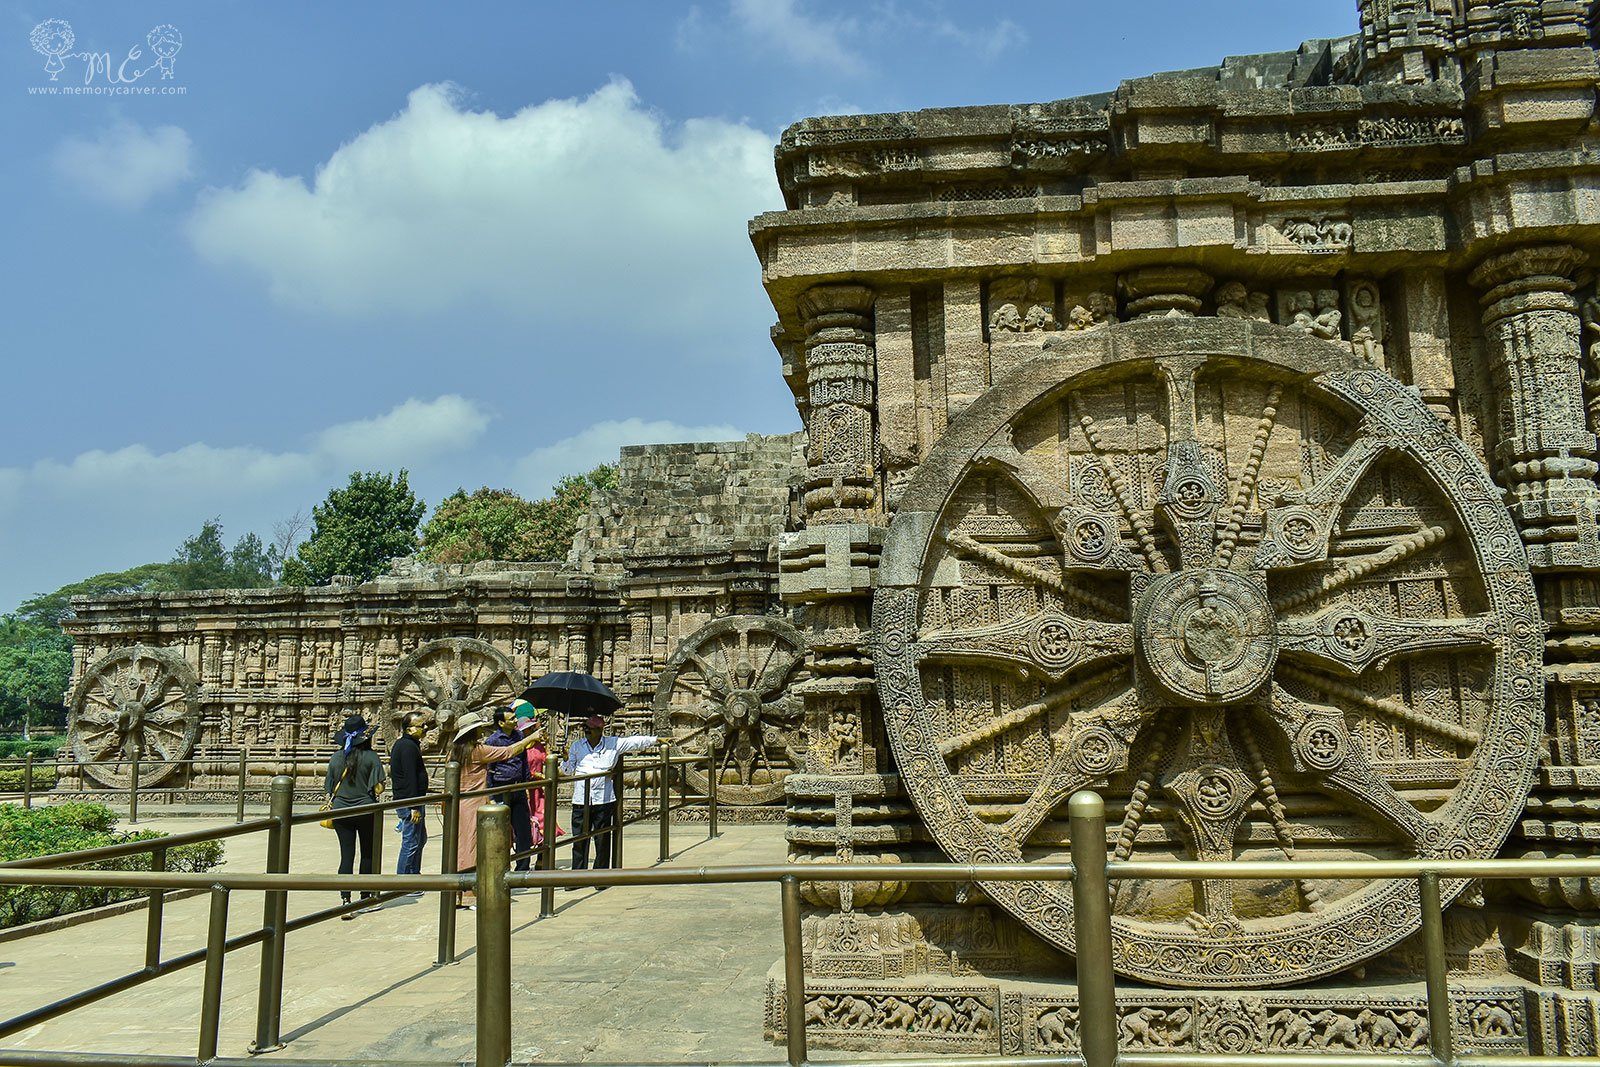 visit Konark sun temple which lists among the top places to visit in Orissa